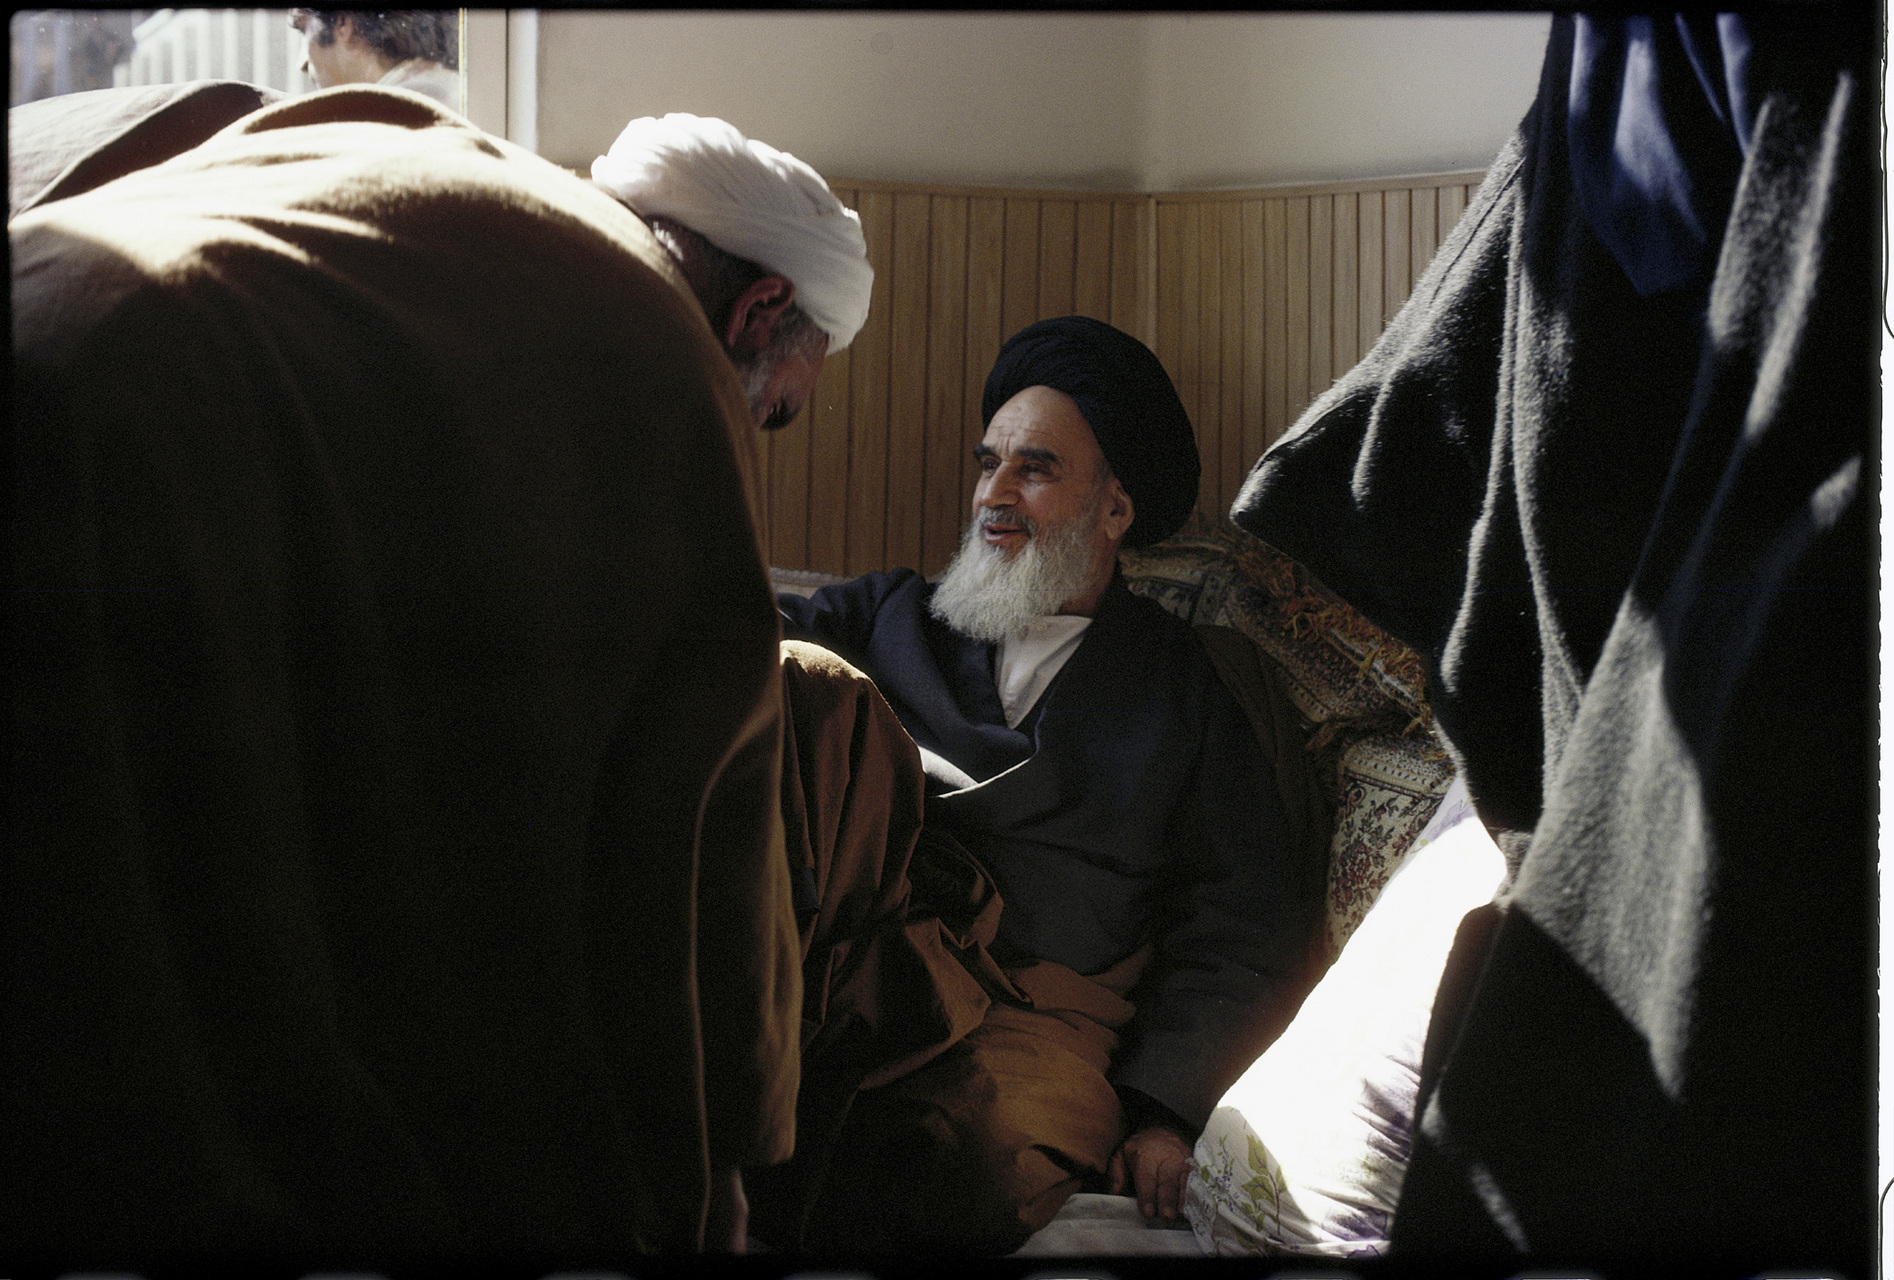 In the small school where he kept his offices after arriving in Tehran, Khomeini greets visitors.